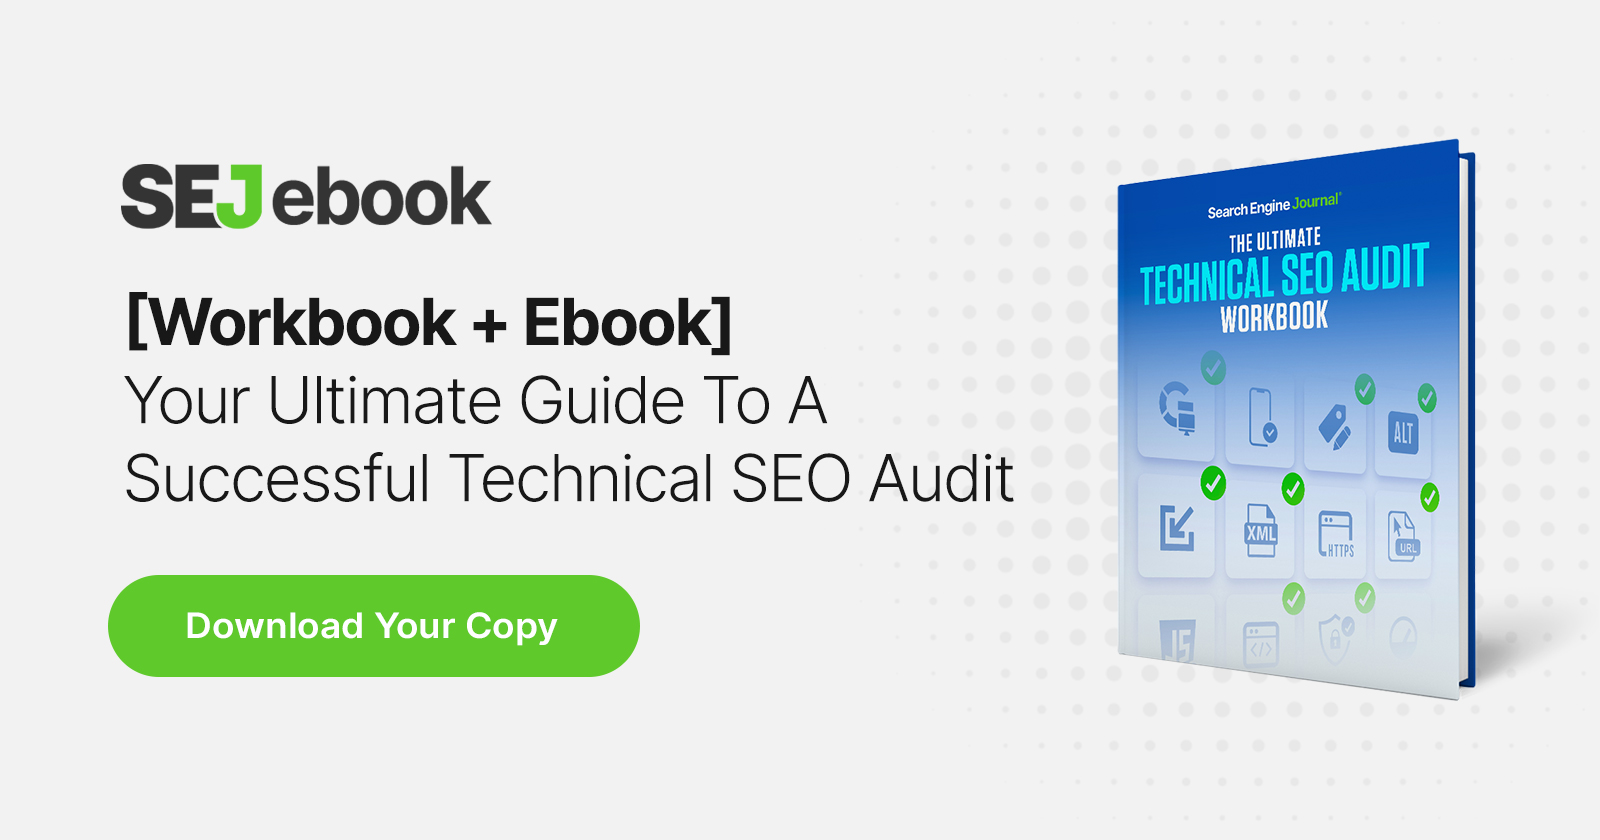 Your Ultimate Guide To A Successful Technical SEO Audit [Workbook + Ebook]